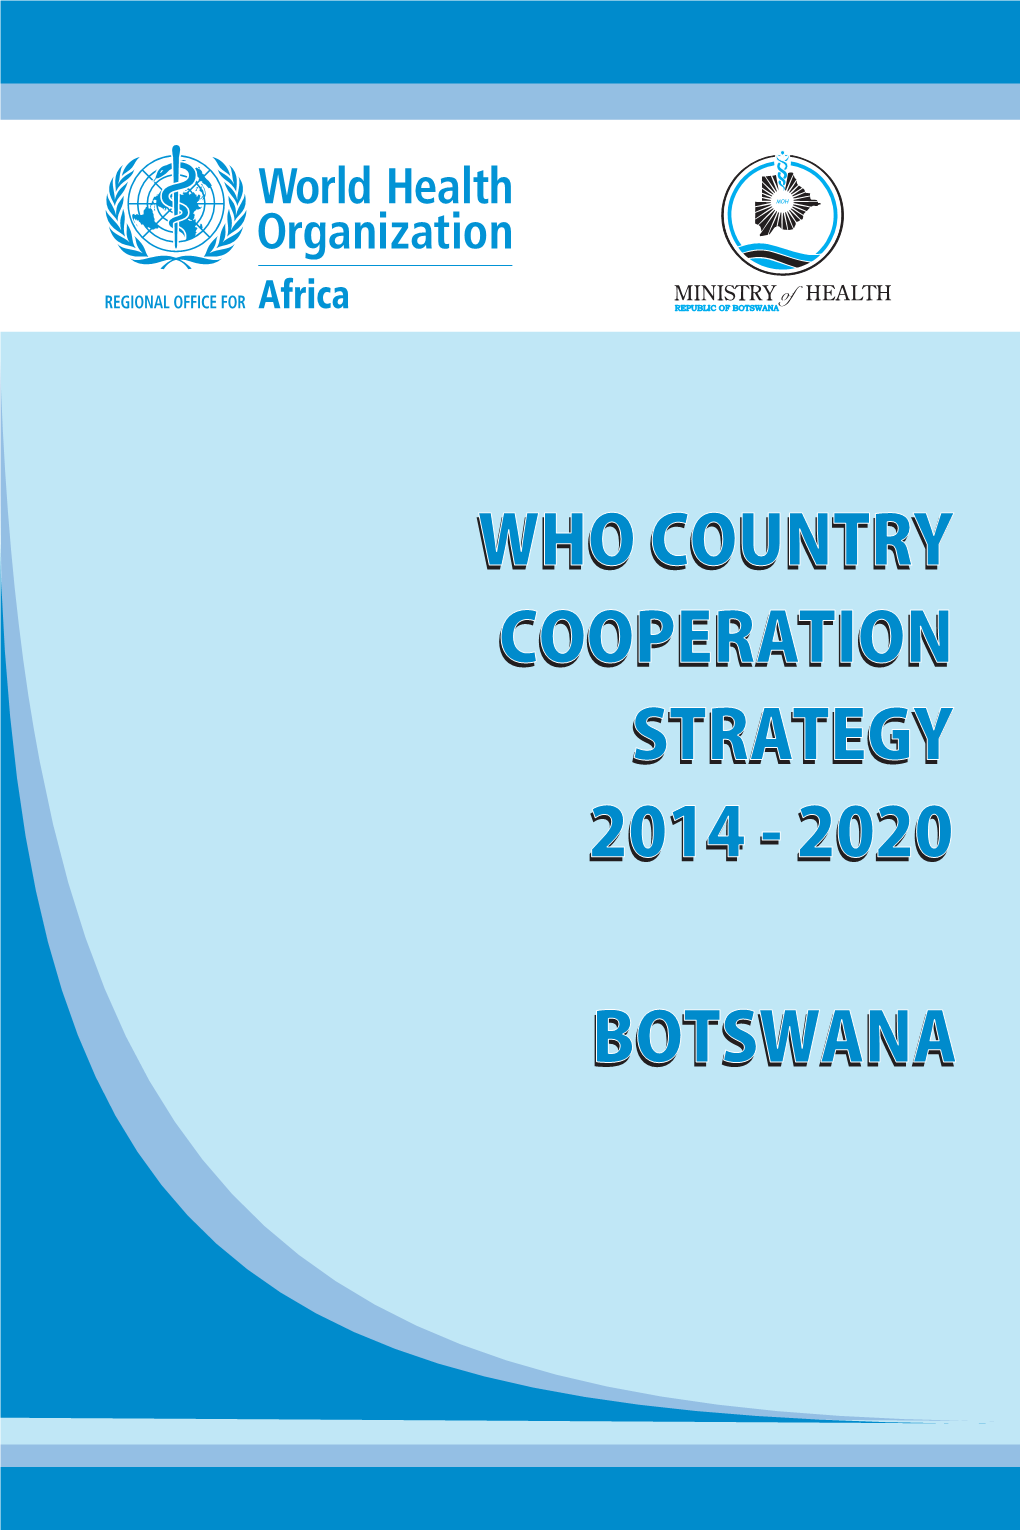 Who Country Cooperation Strategy 2014-2020, Botswana